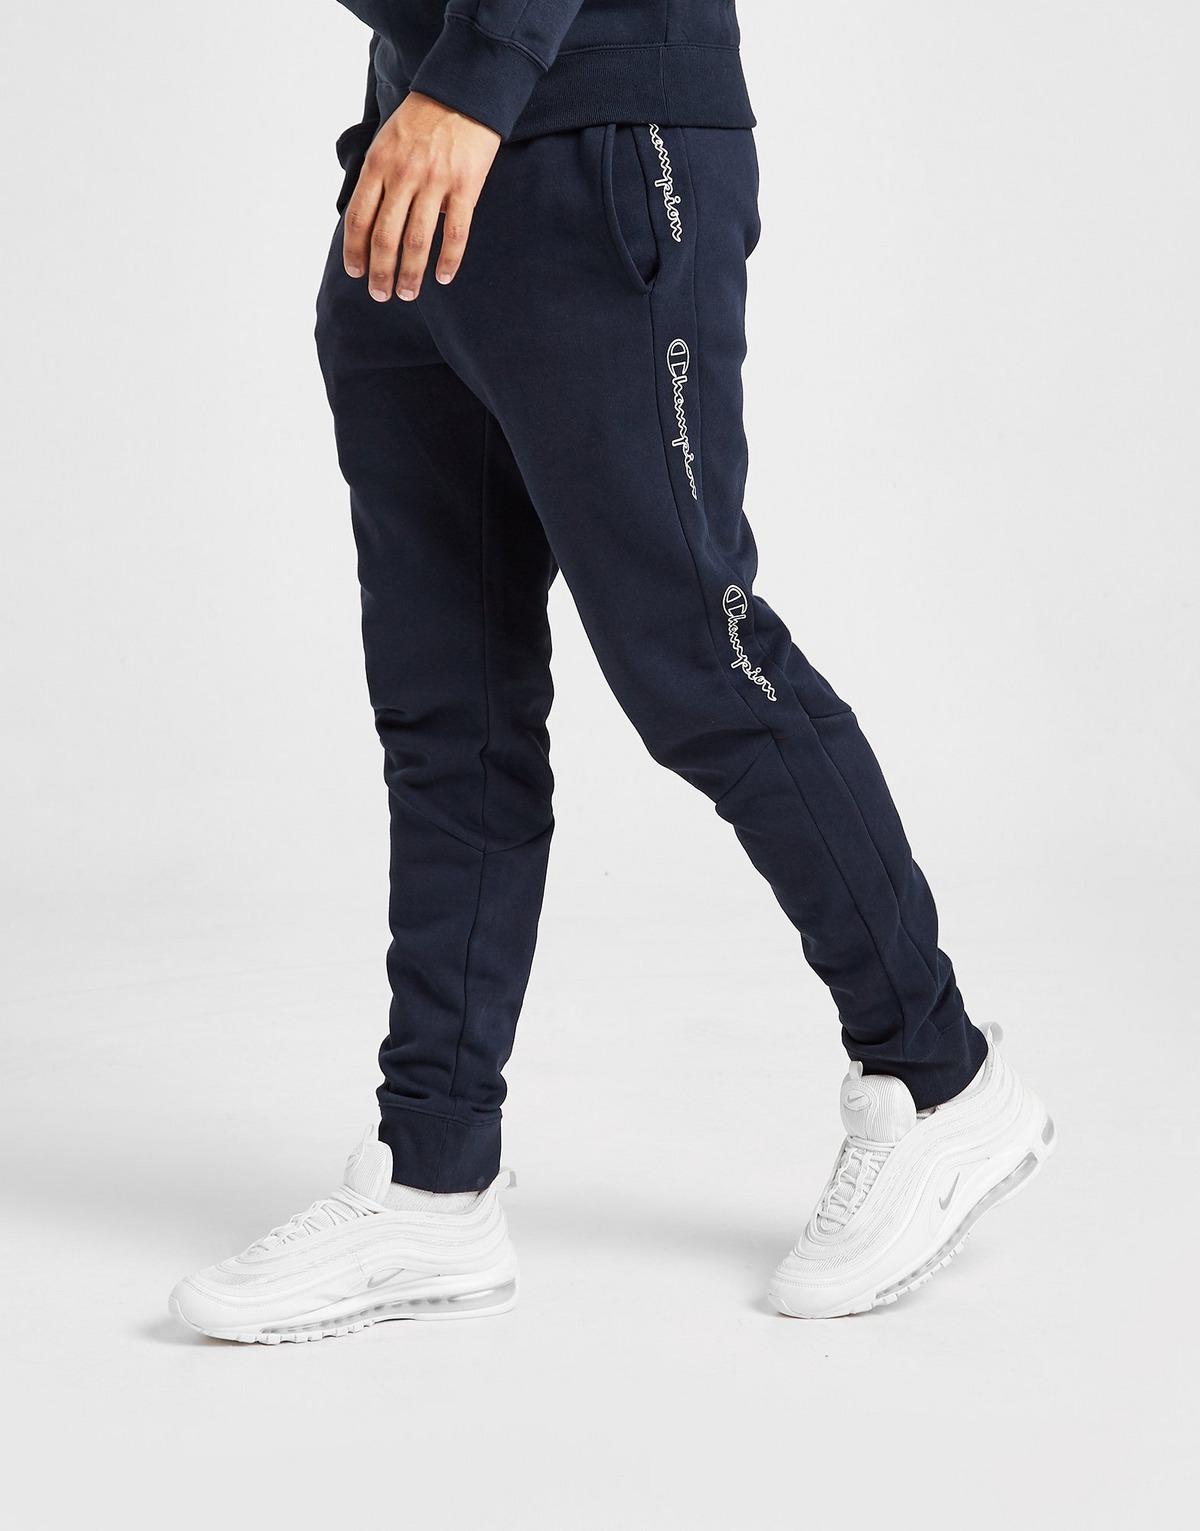 Champion Cotton Tape Joggers in Navy (Blue) for Men - Lyst